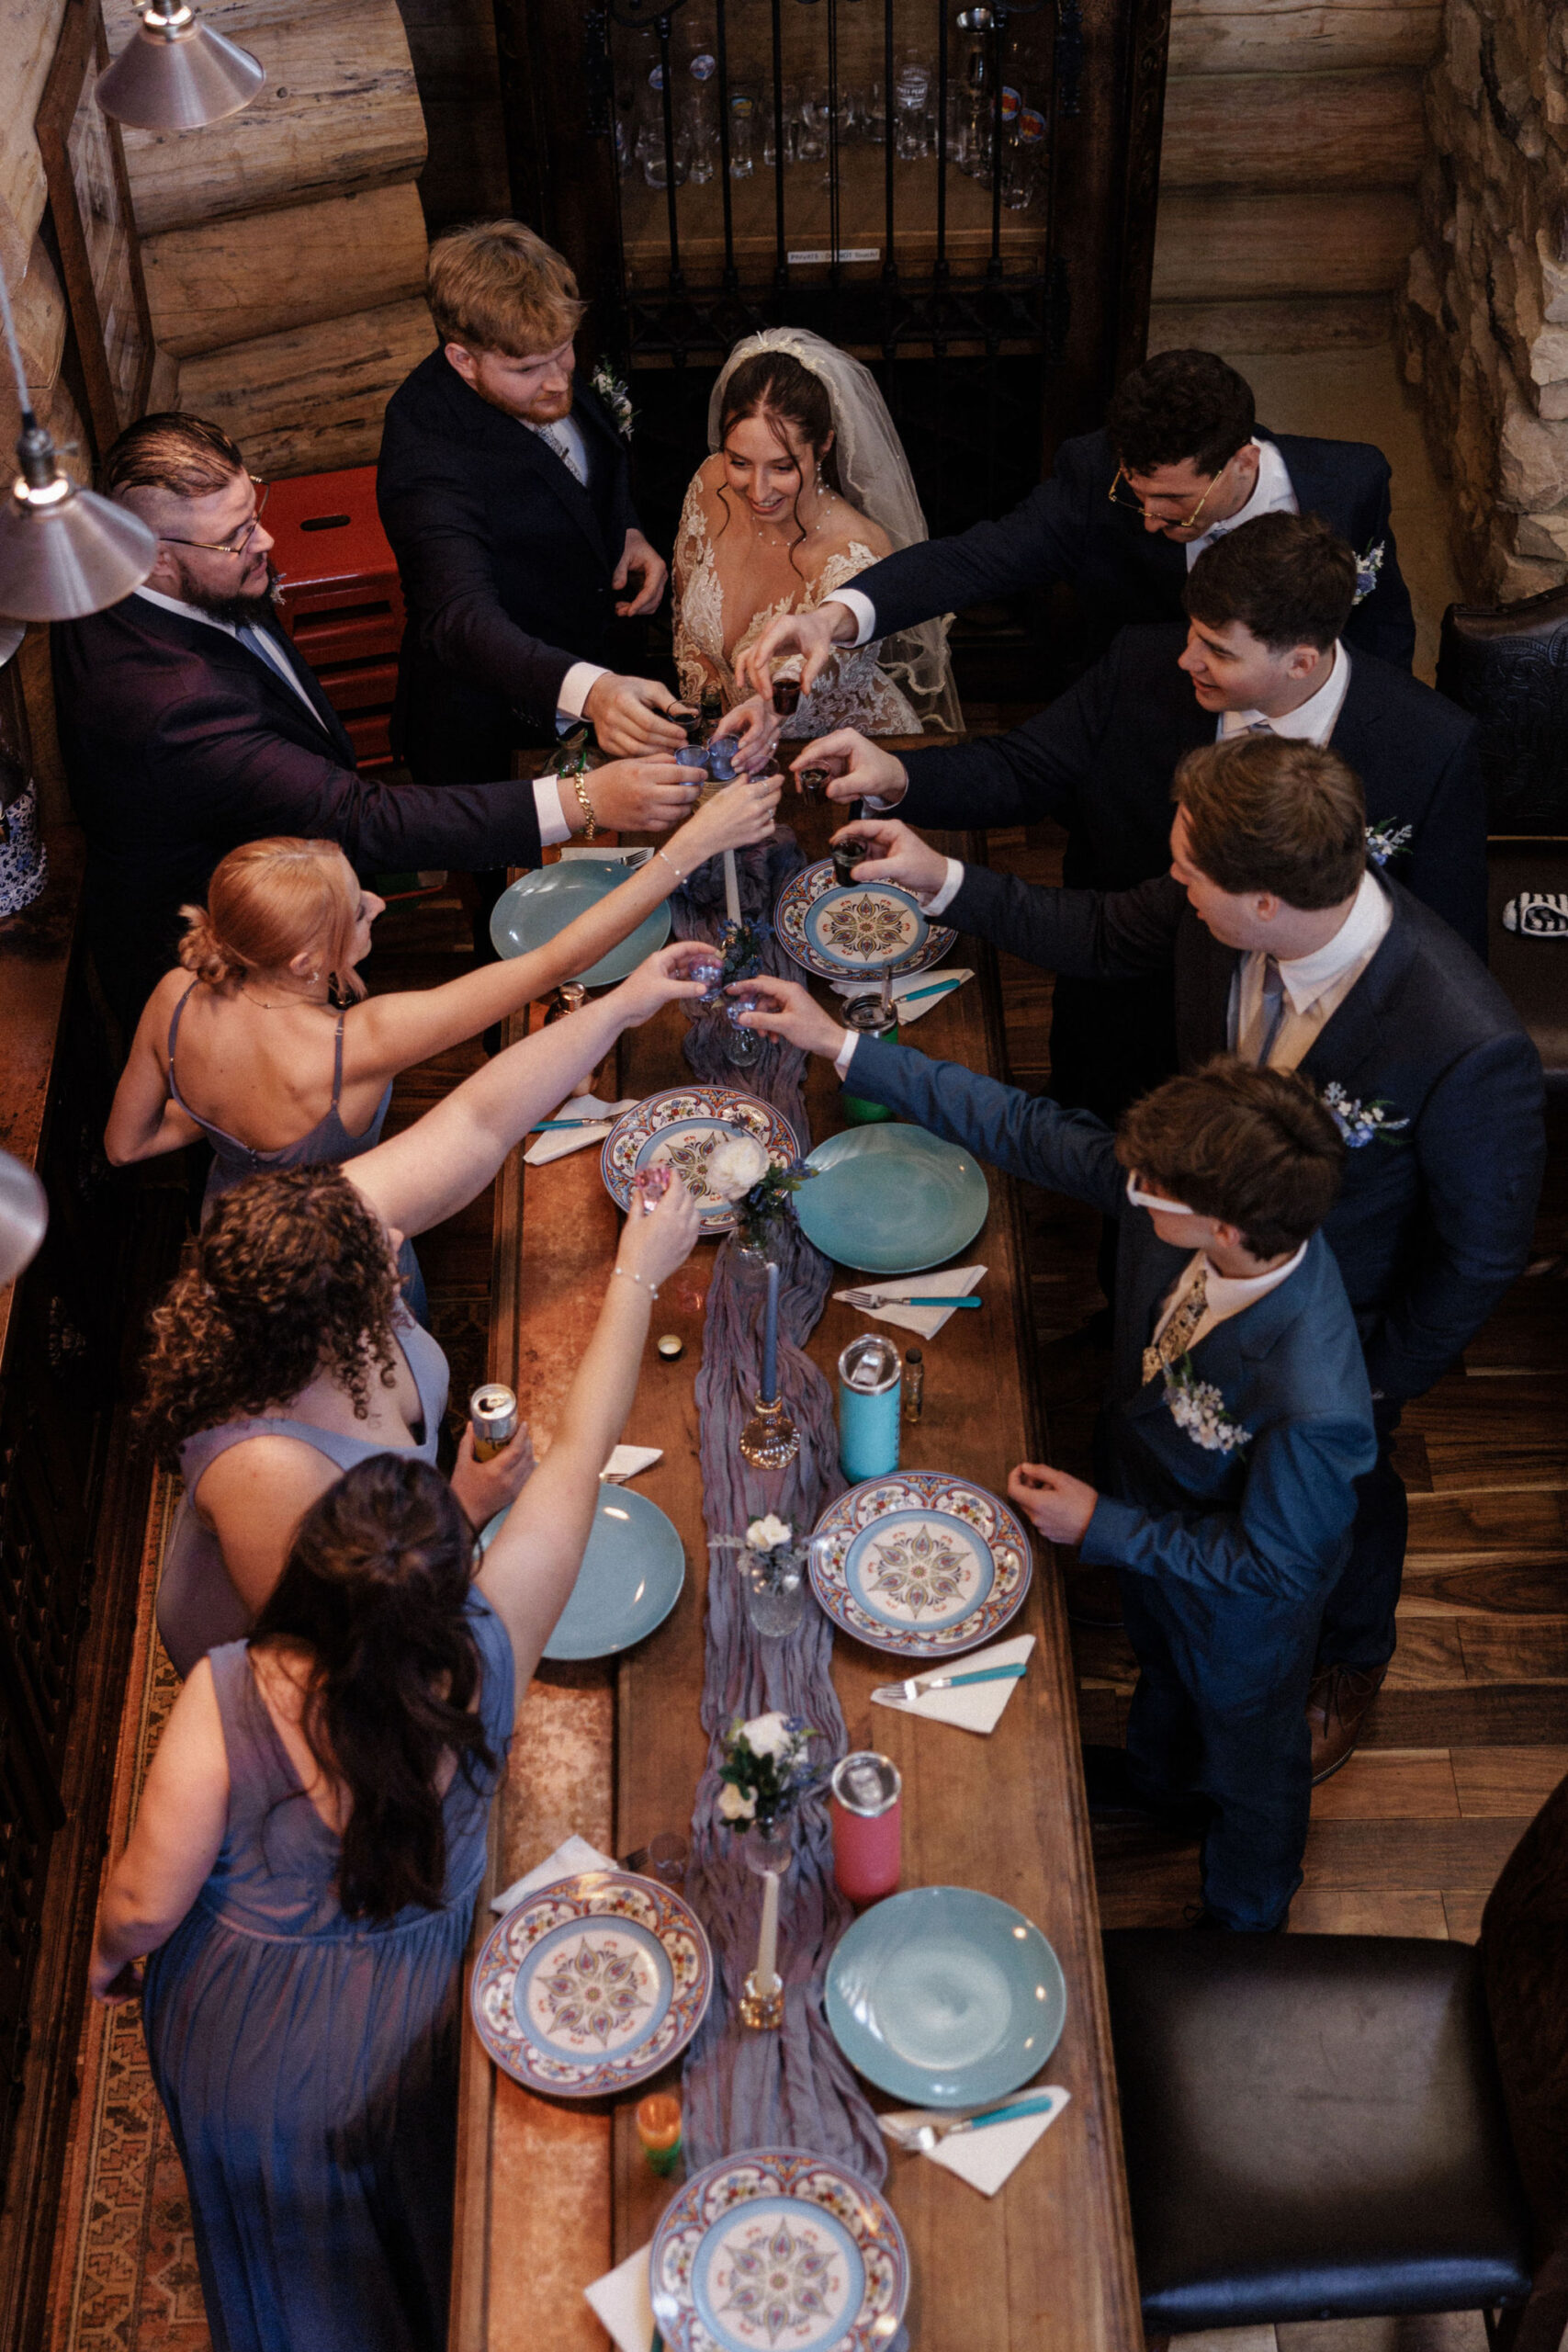 after asking questions to wedding vendors, bride, groom, and family make a toast